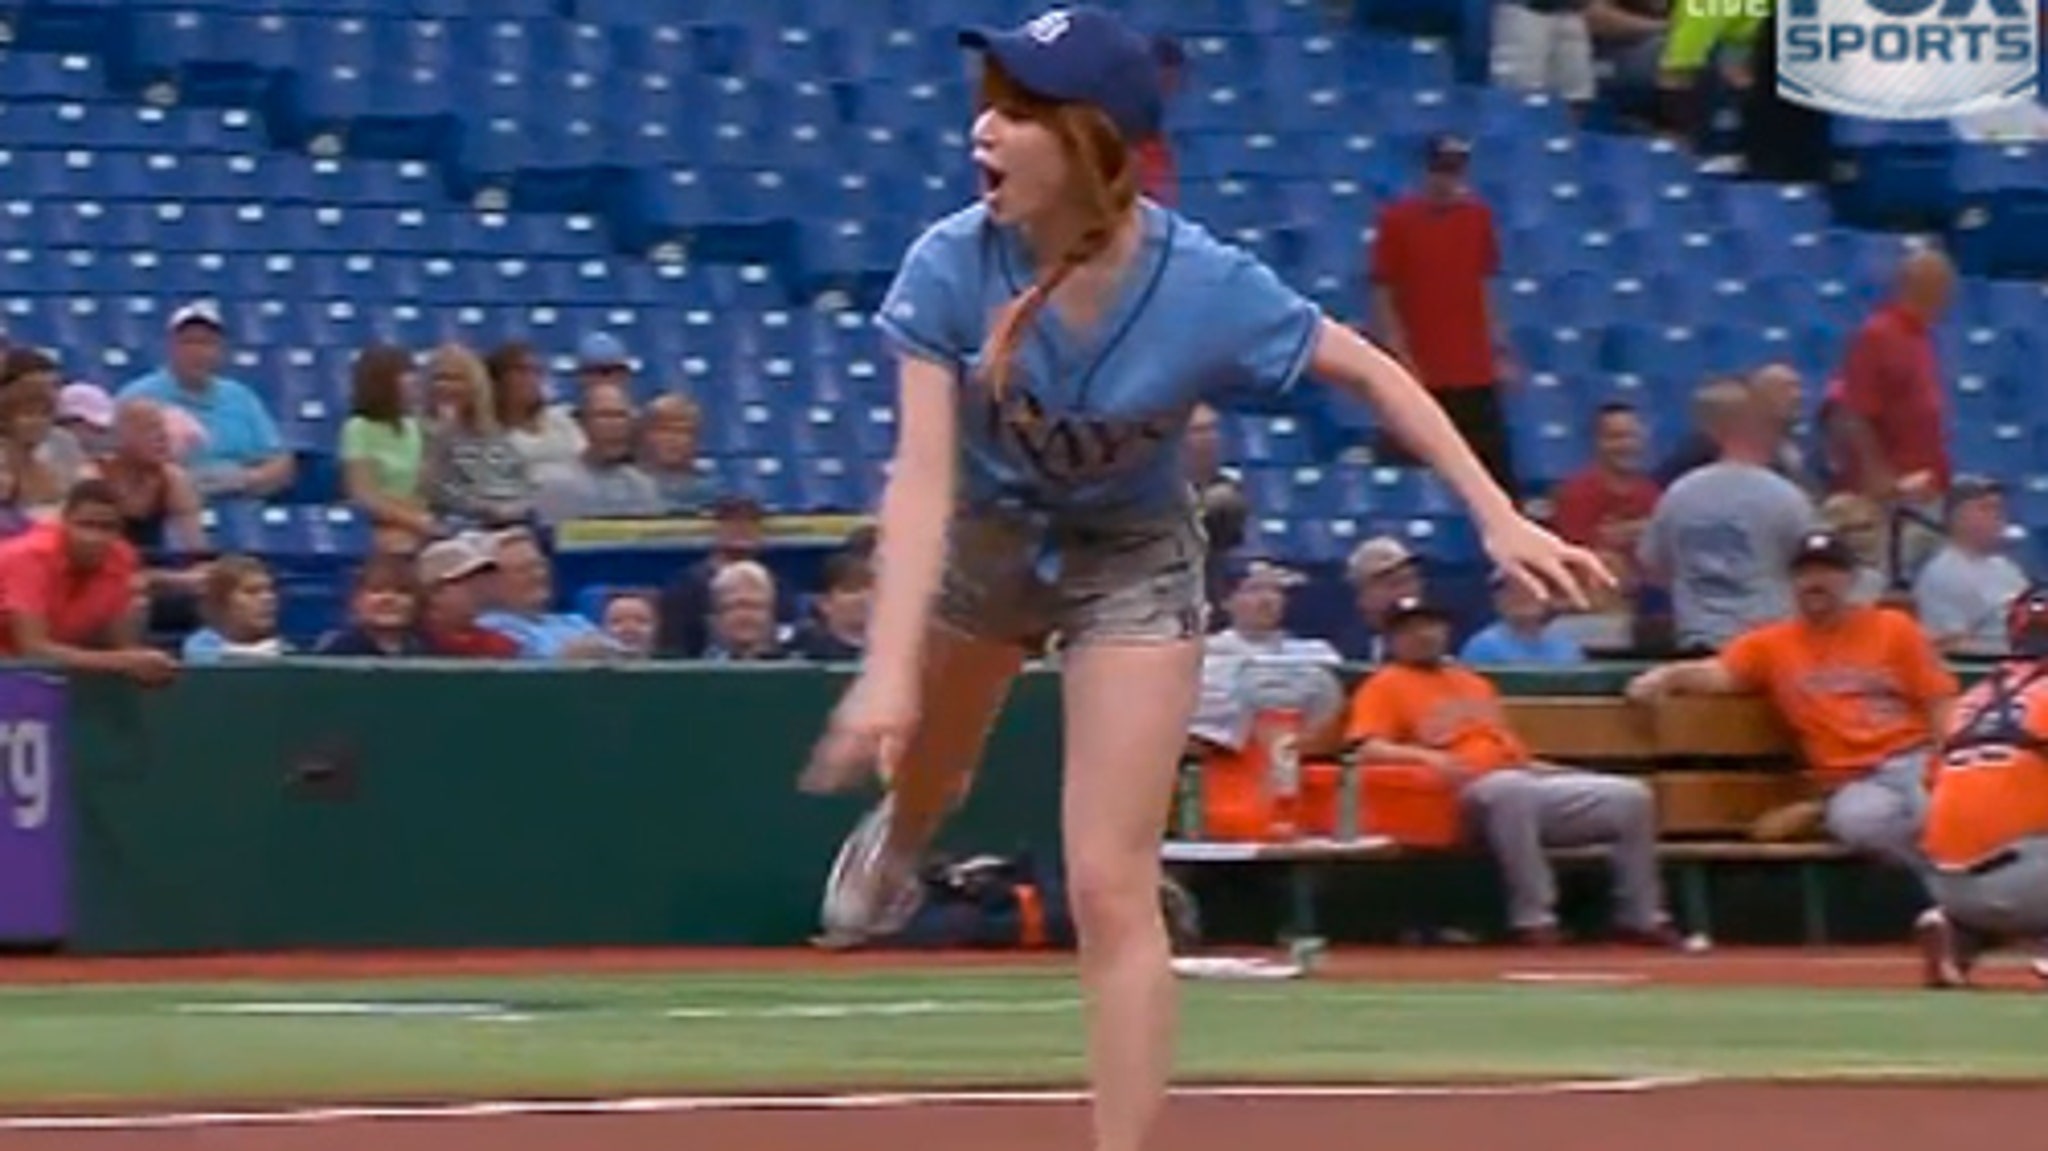 Video: Carly Rae Jepsen's Awful First Pitch